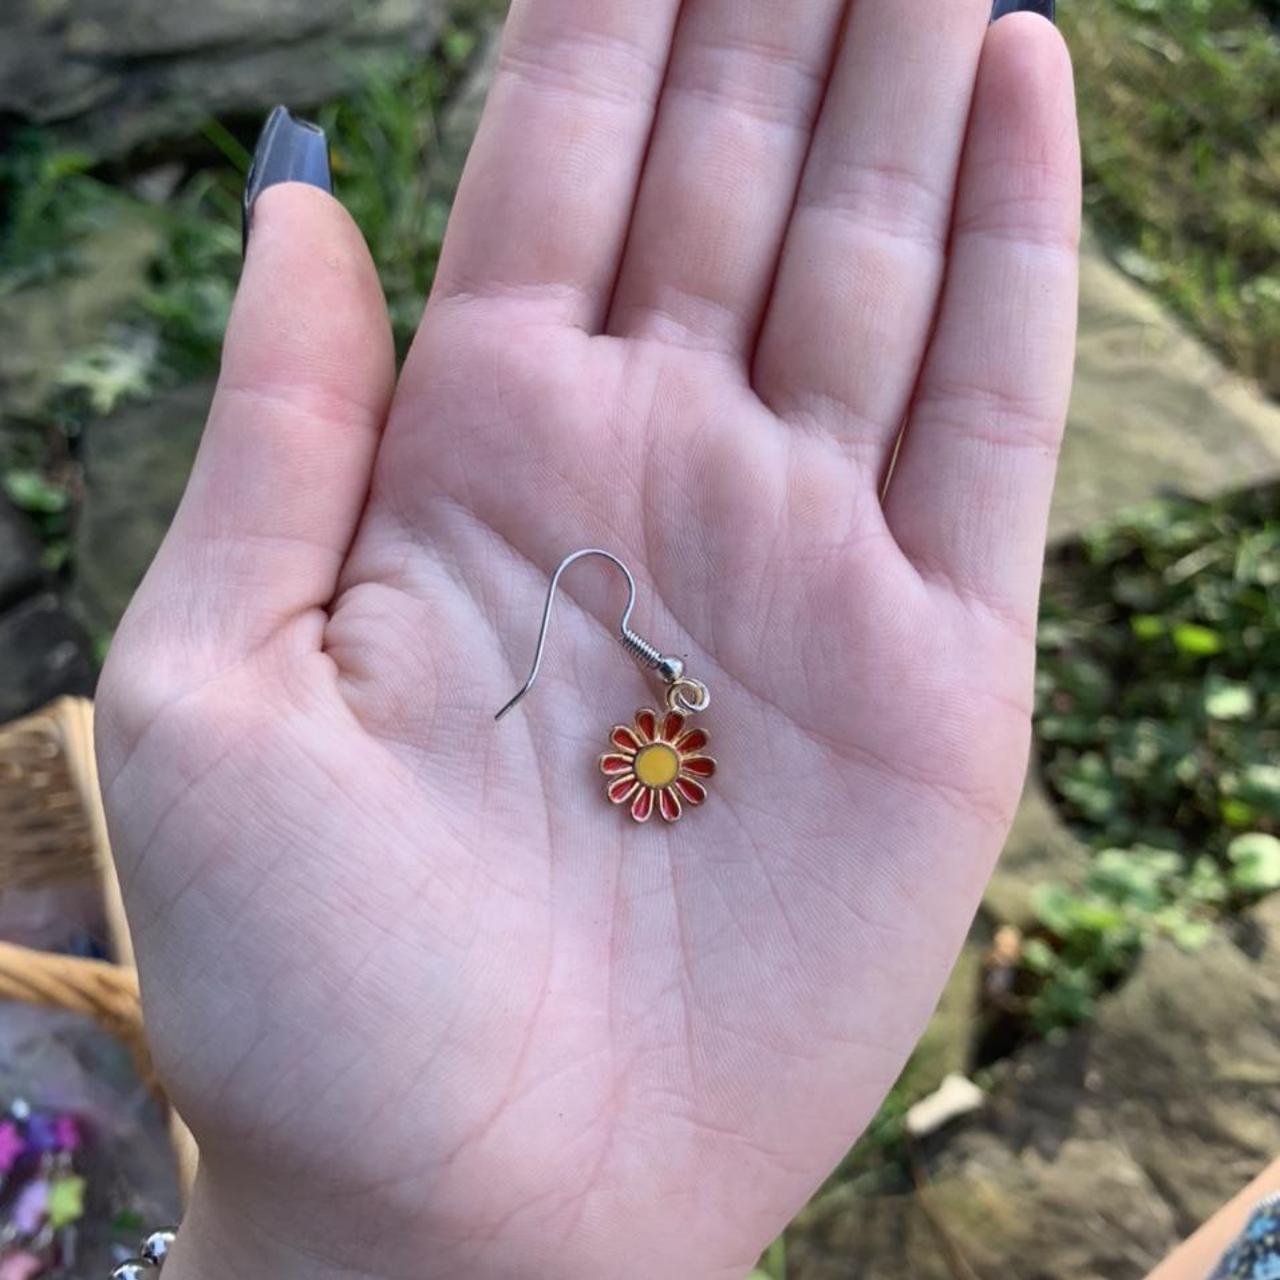 Product Image 2 - Adorable red and yellow flower